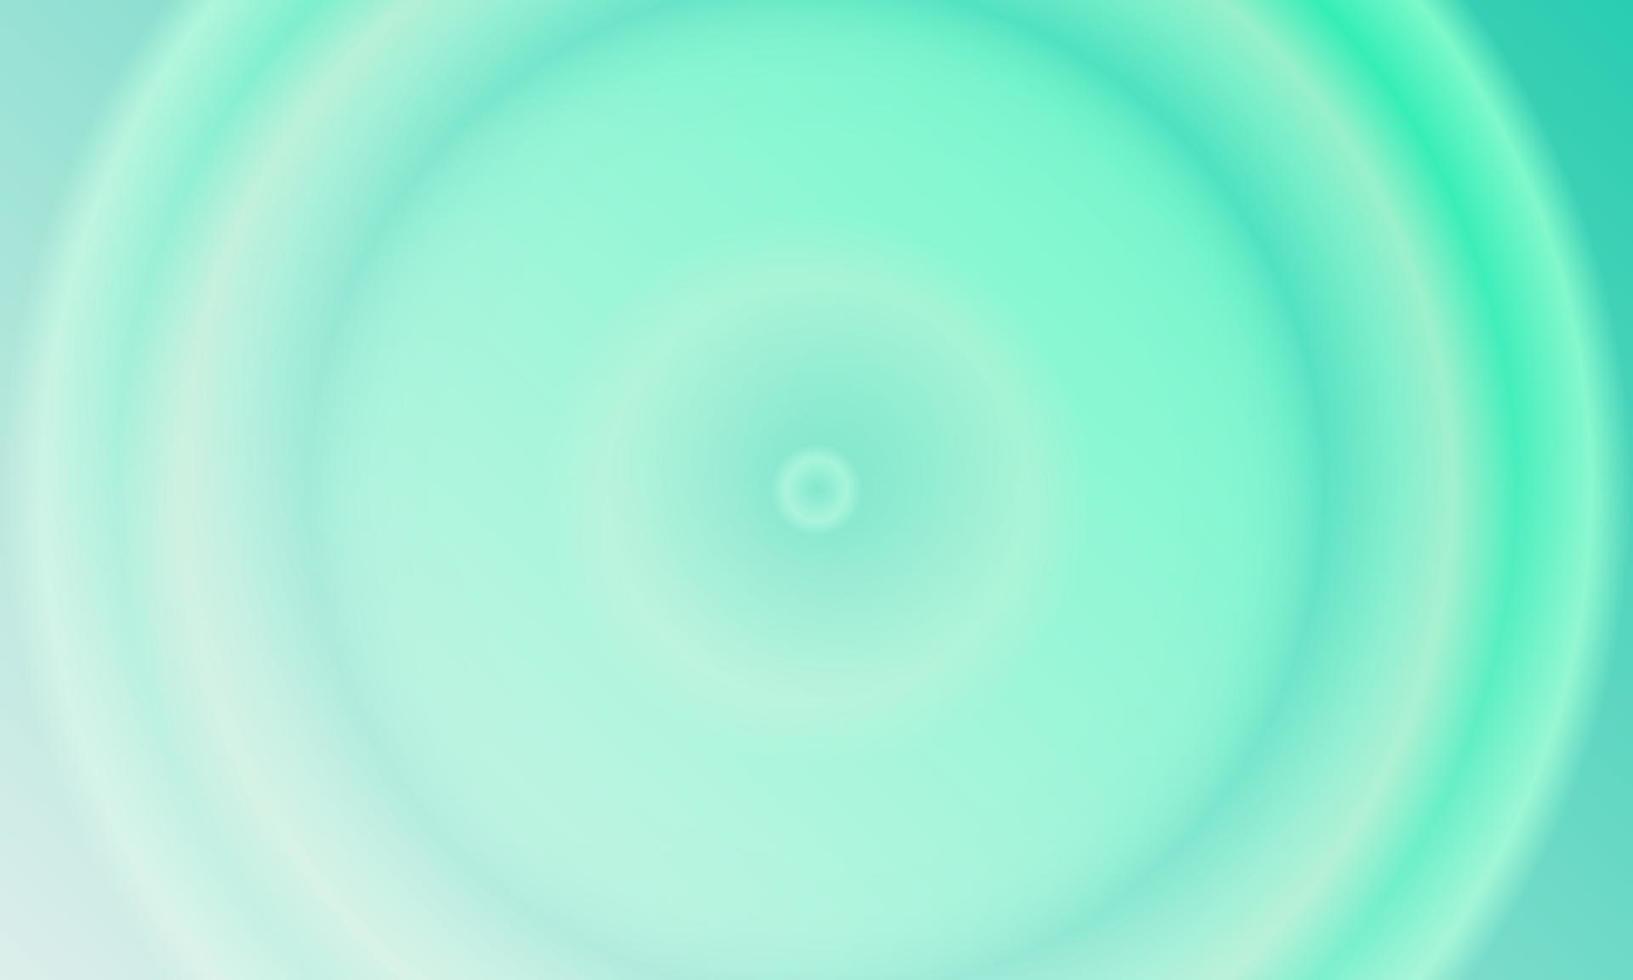 tosca green and white radial gradient abstract background. simple, minimal, modern and colorful style. use for homepage, backgdrop, wallpaper, banner or flyer vector